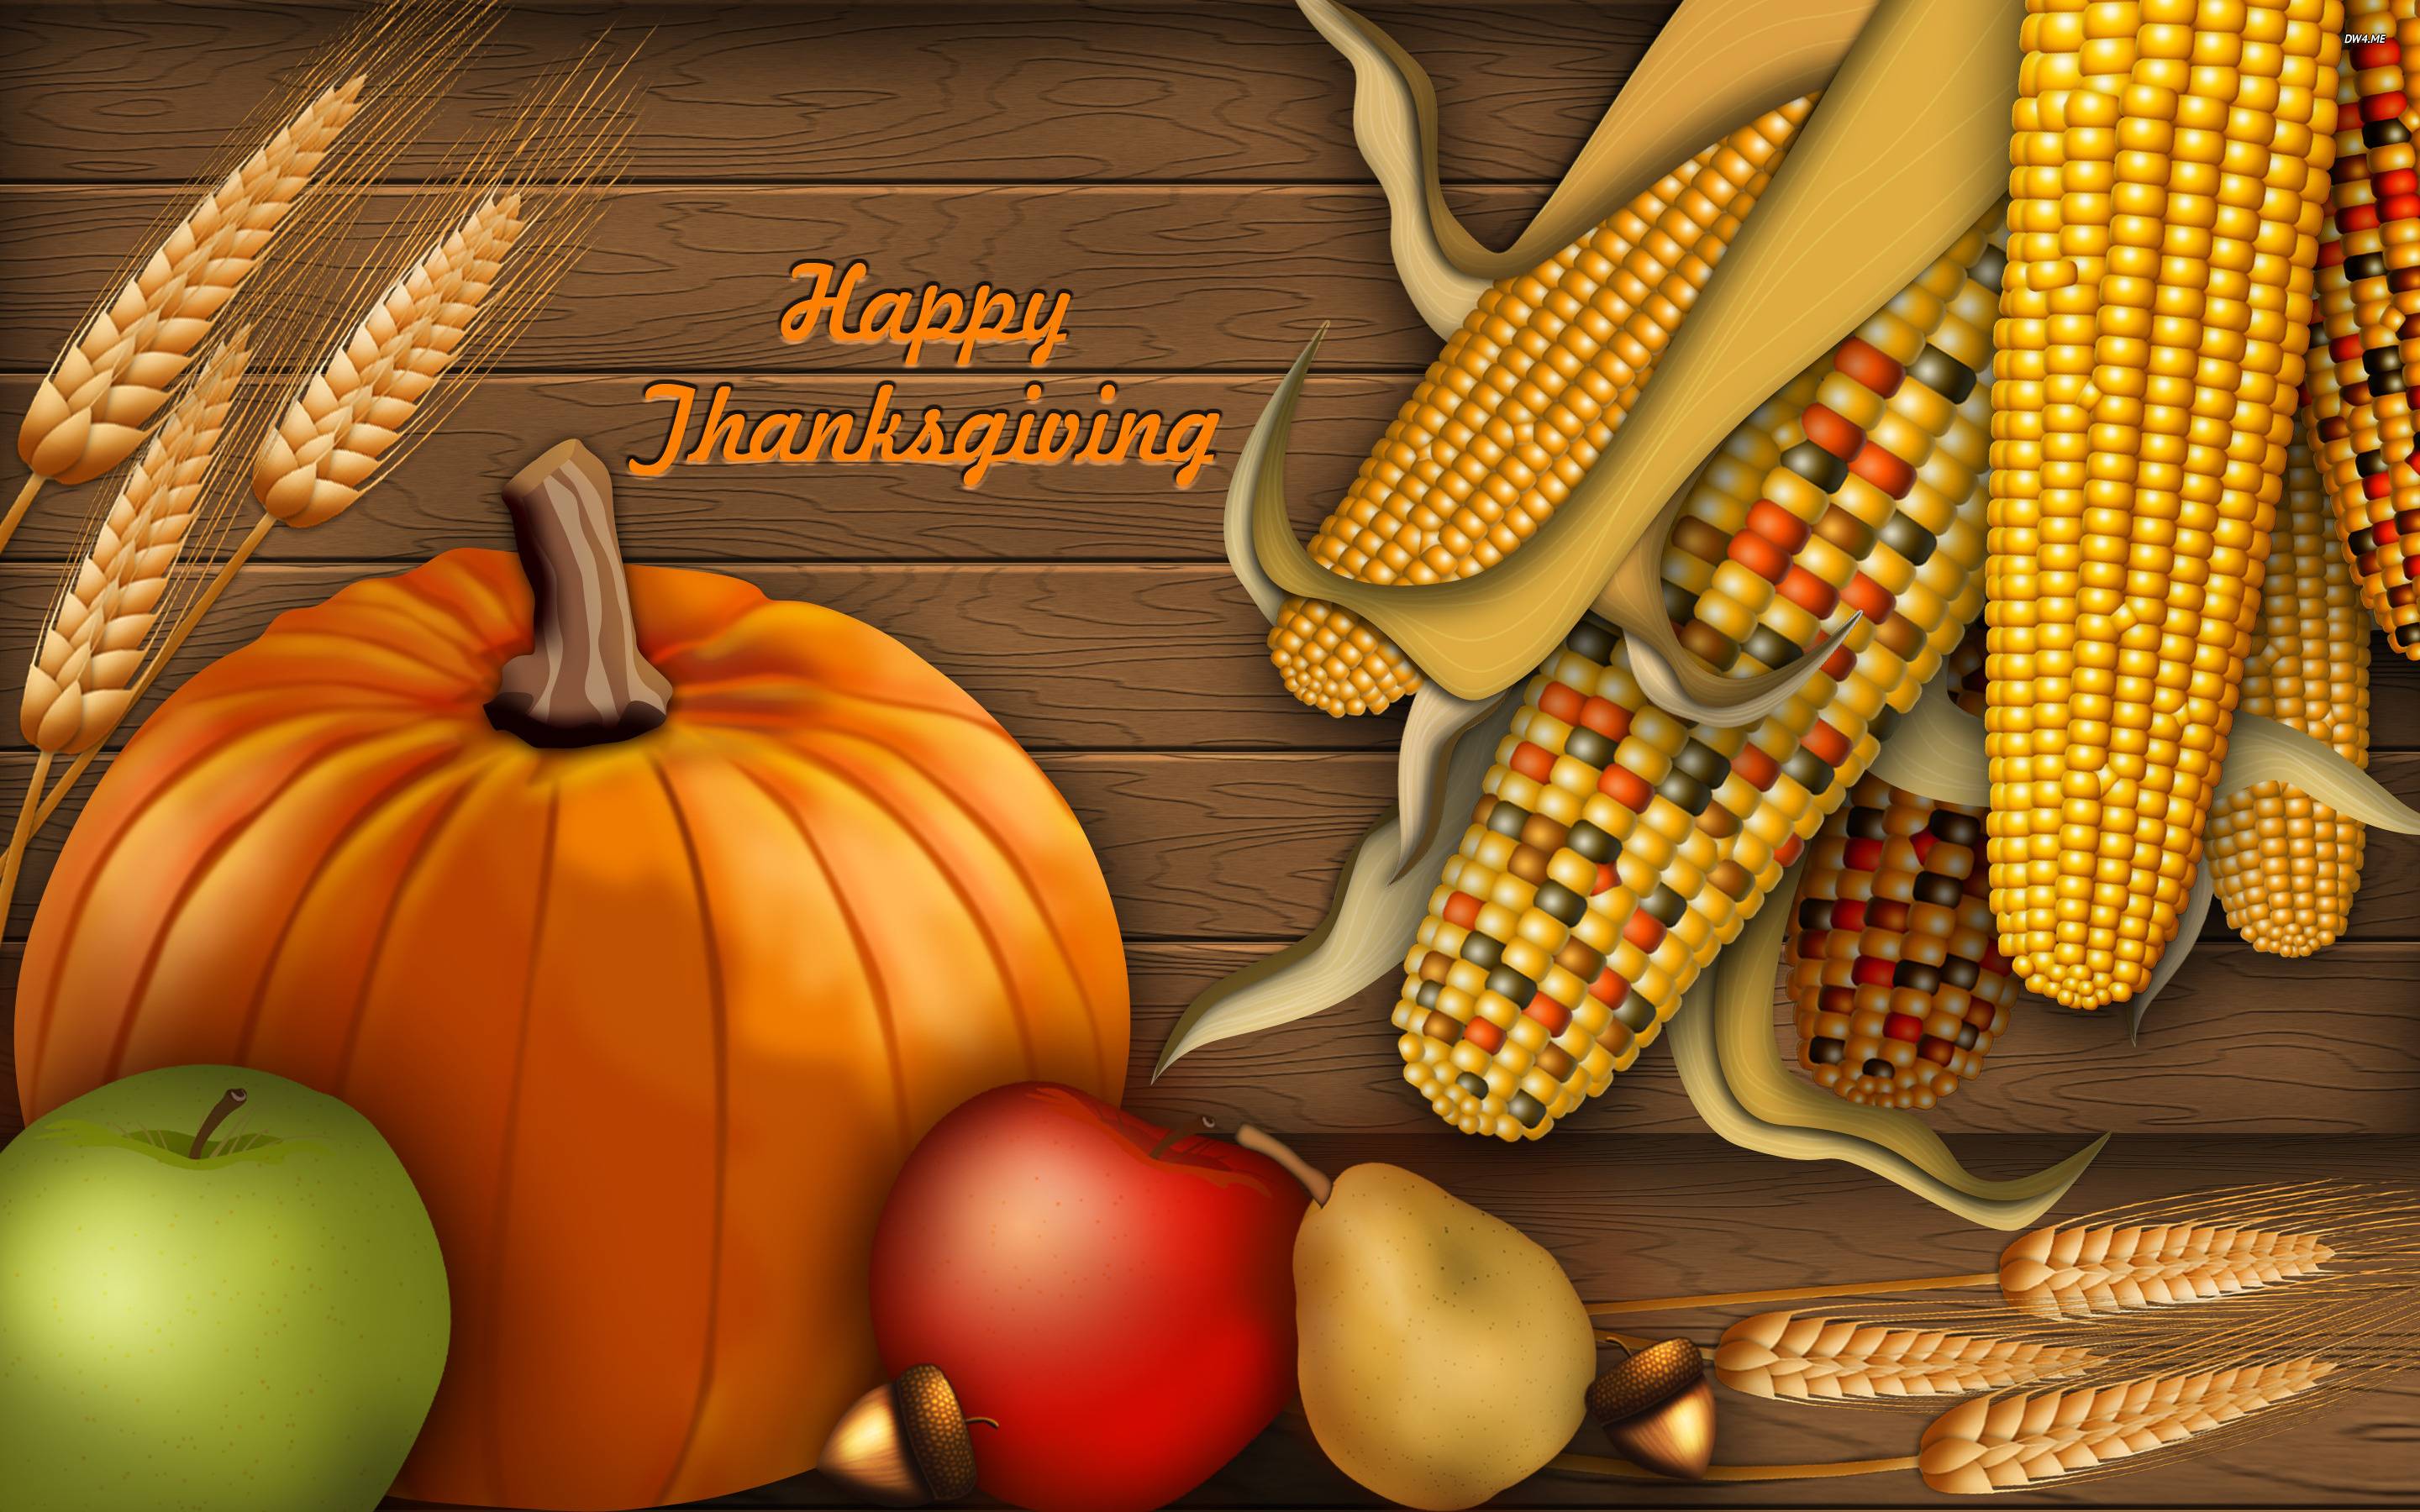 dced4Meck Thanksgiving holiday HD free wallpaper background